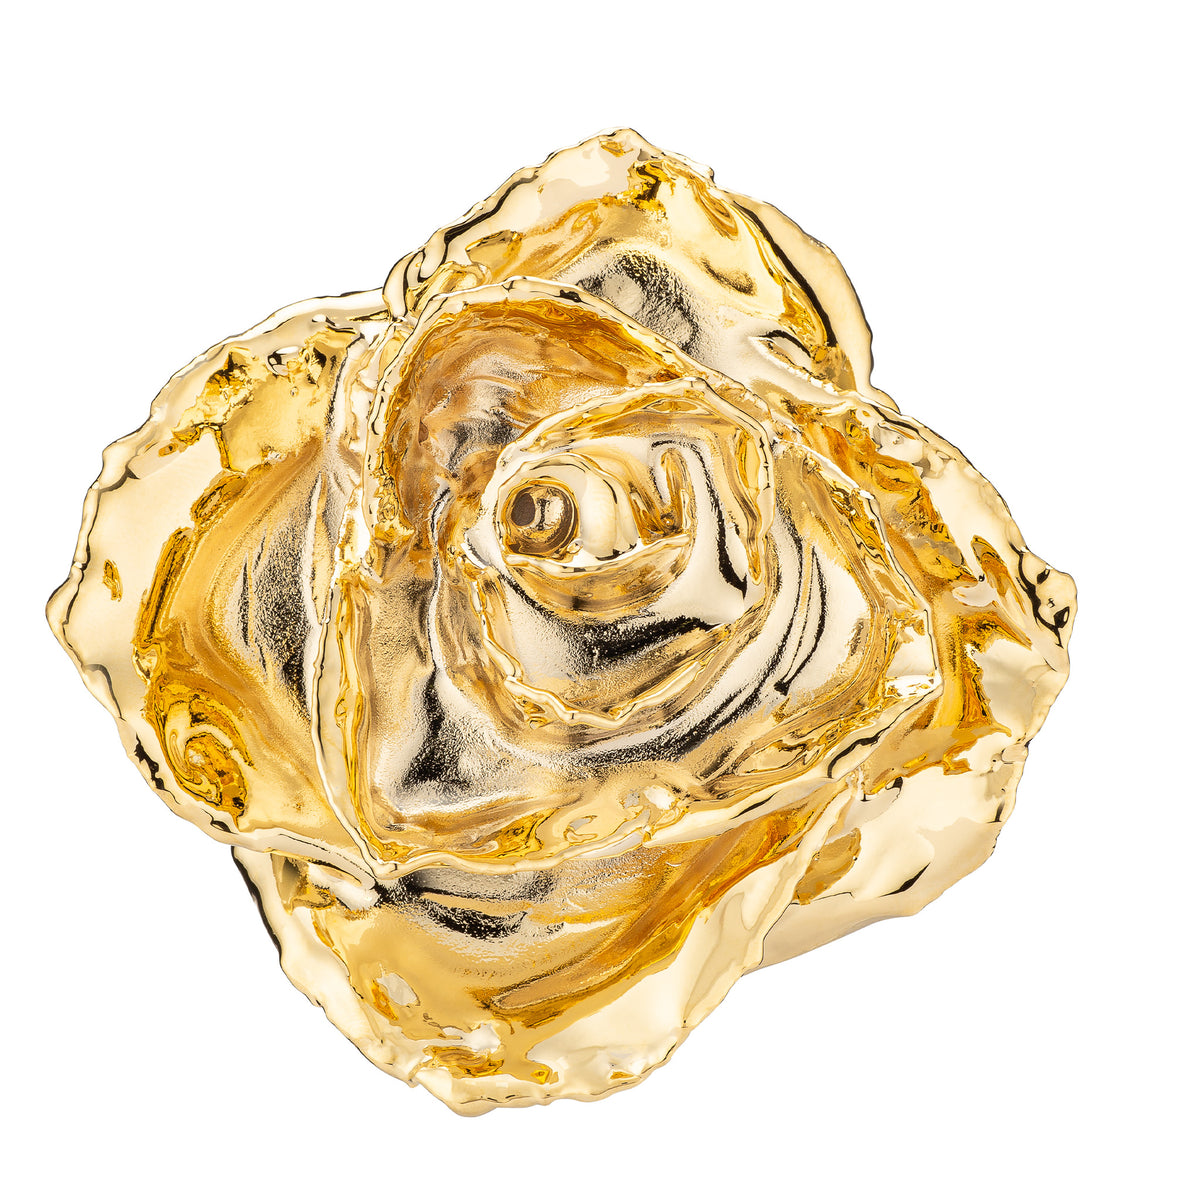 Real 24K Gold Forever Rose. Rose is fully dipped in gold. View looking down into the rose petals shows the rose petals covered in 24 karat gold.